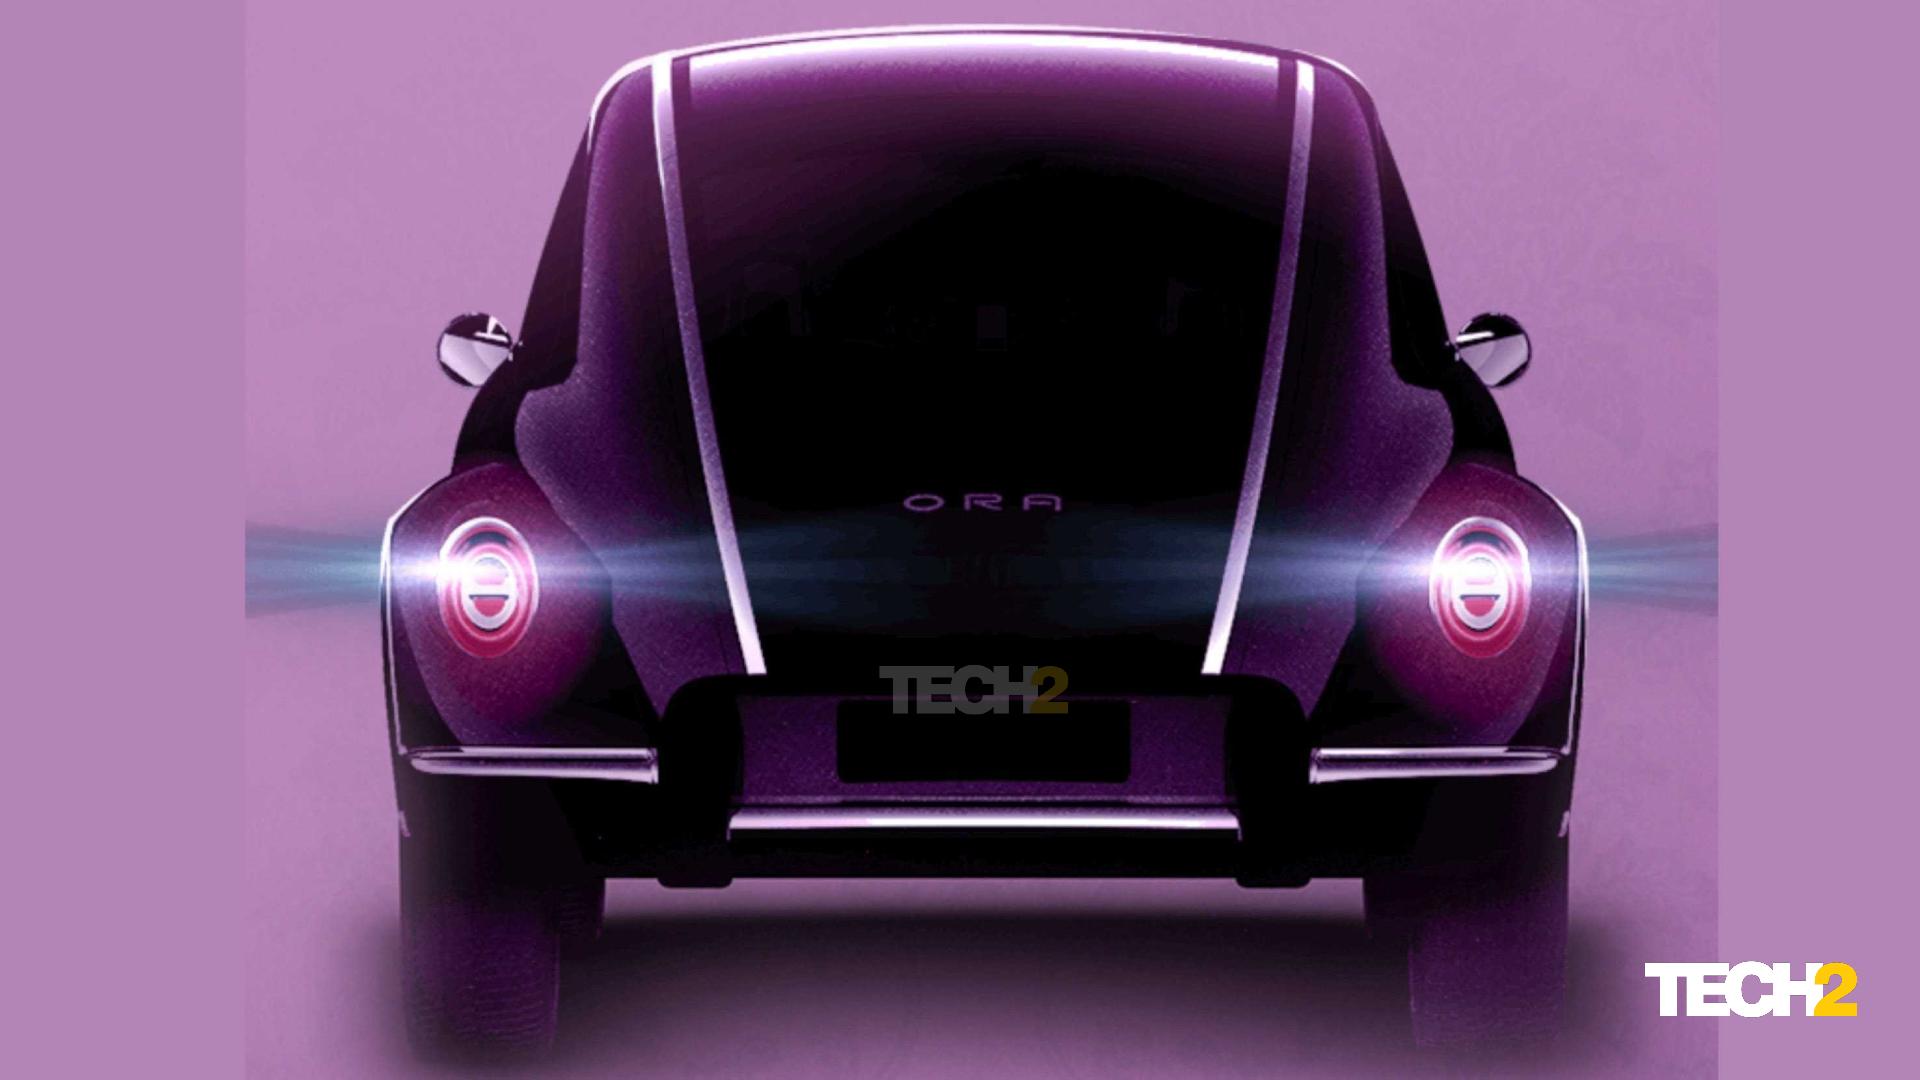 Curved tail section, protruding bumpers and oval tail-lights are signature Beetle cues. Image: ORA